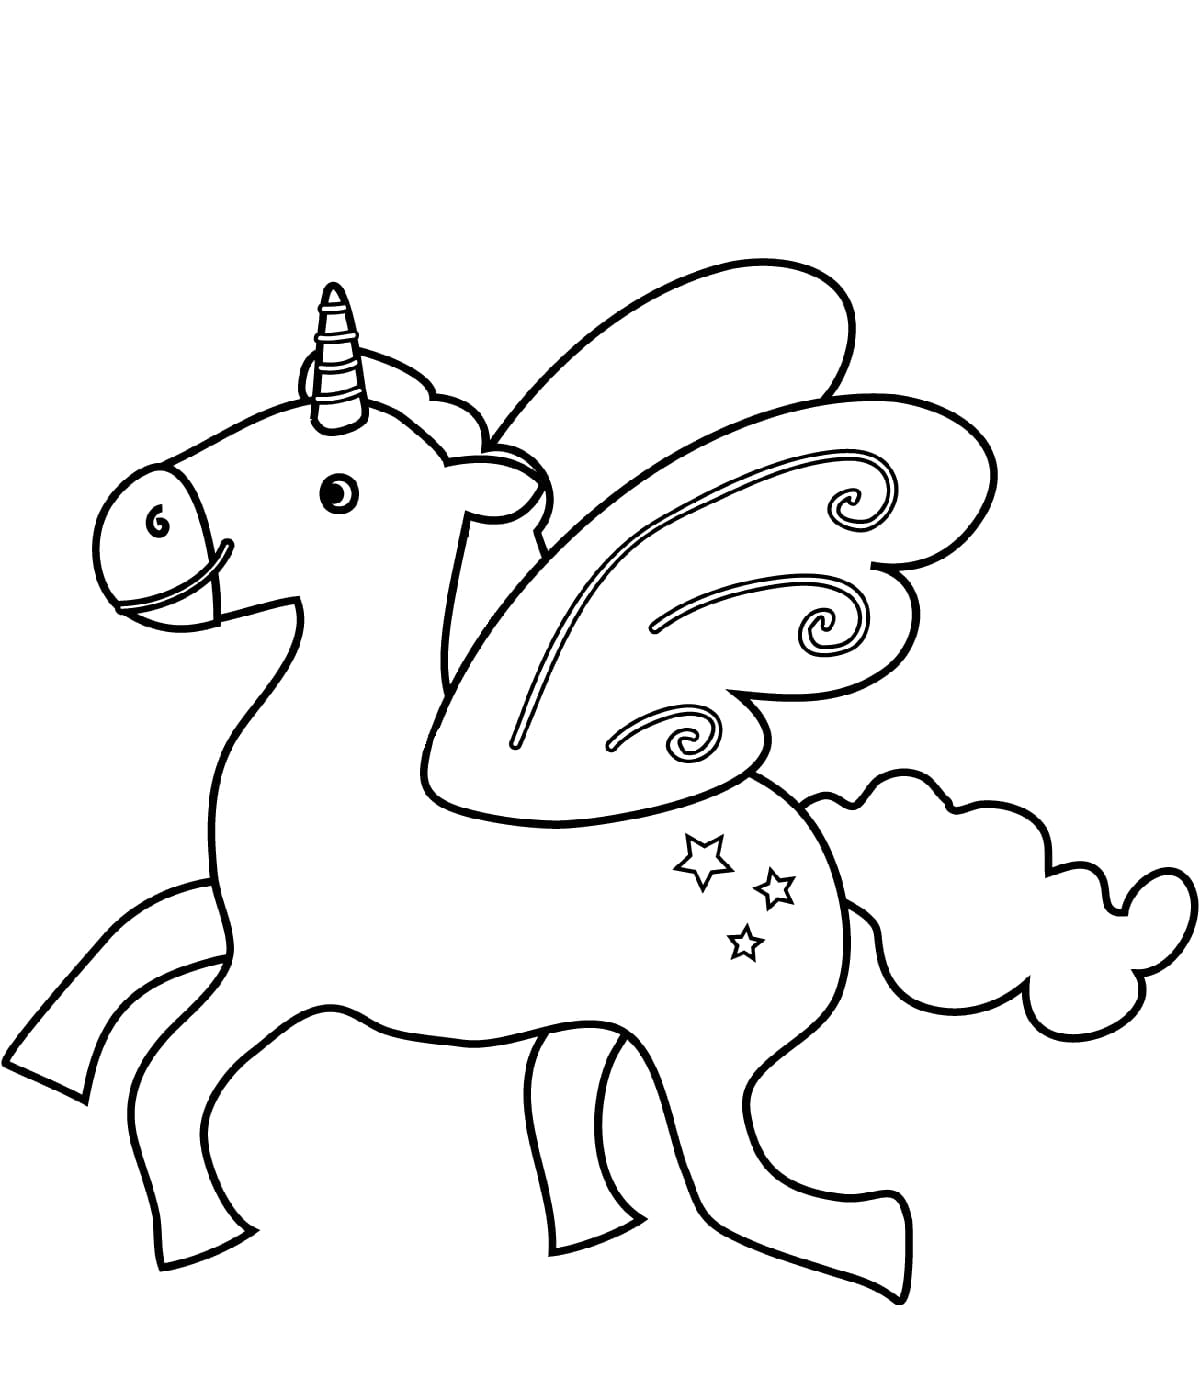 butterfly winged unicorn coloring page free printable coloring pages for kids